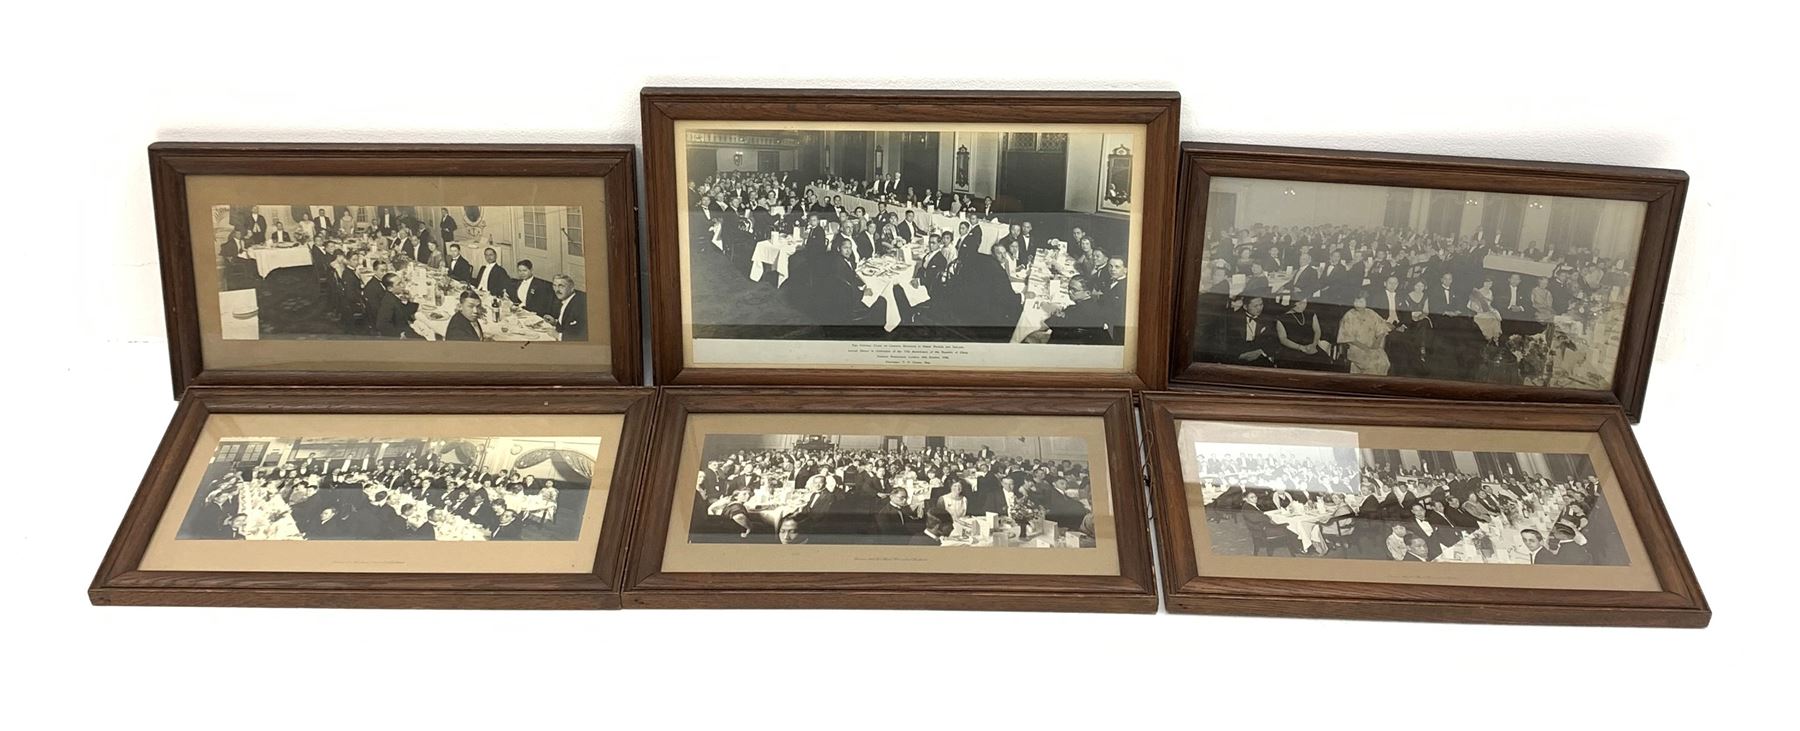 A 20th century framed and glazed black and white photograph depicting and inscribed The Central Unio